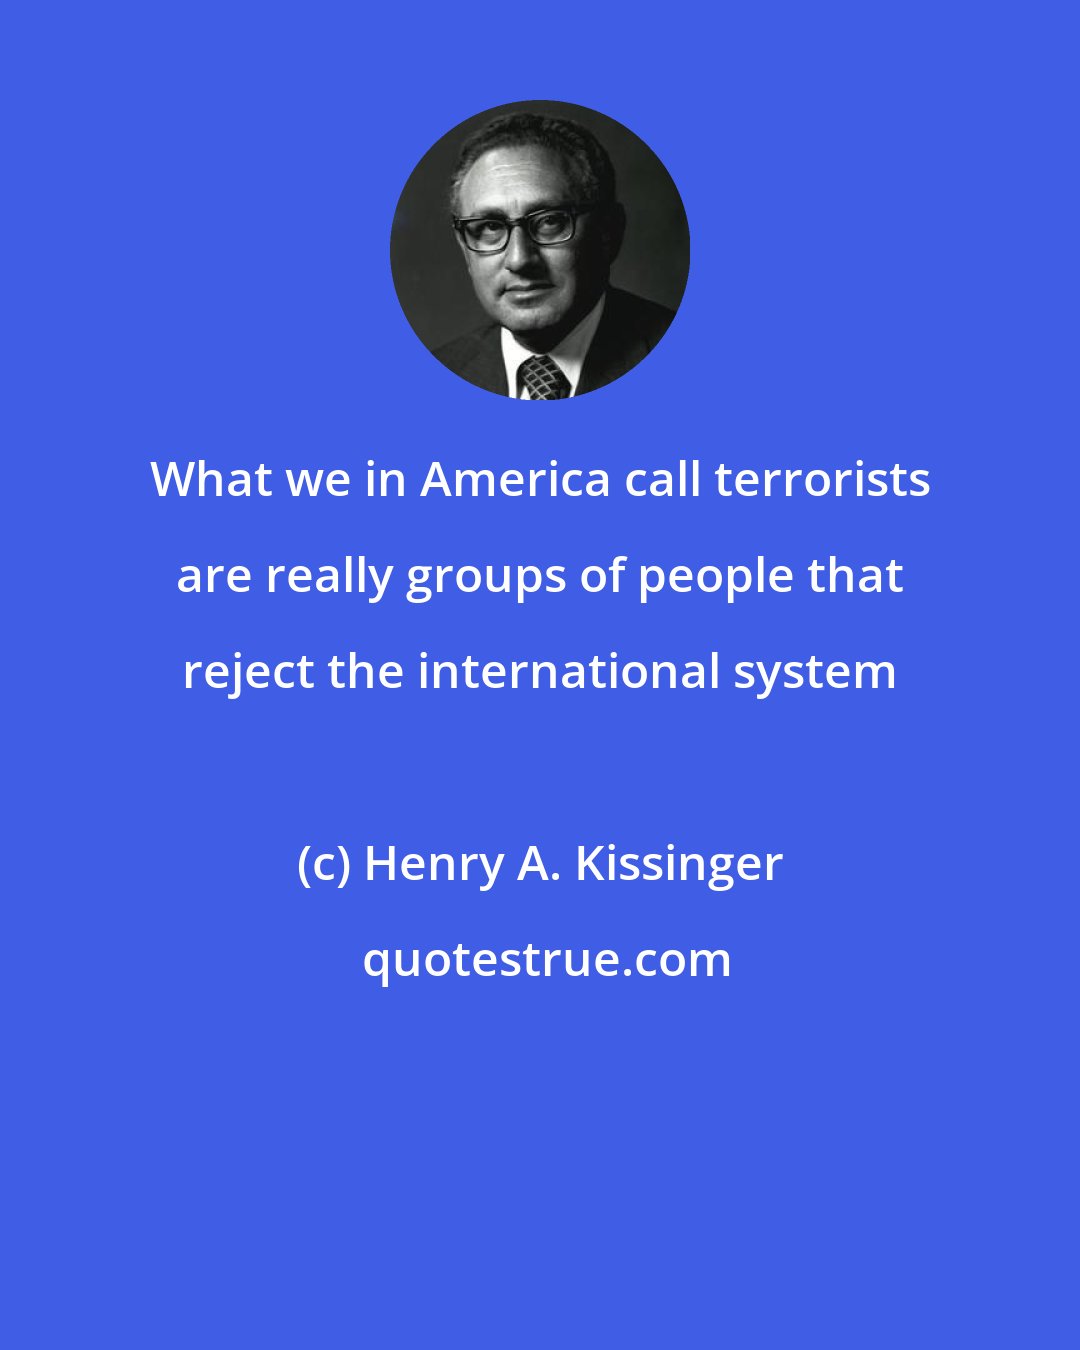 Henry A. Kissinger: What we in America call terrorists are really groups of people that reject the international system